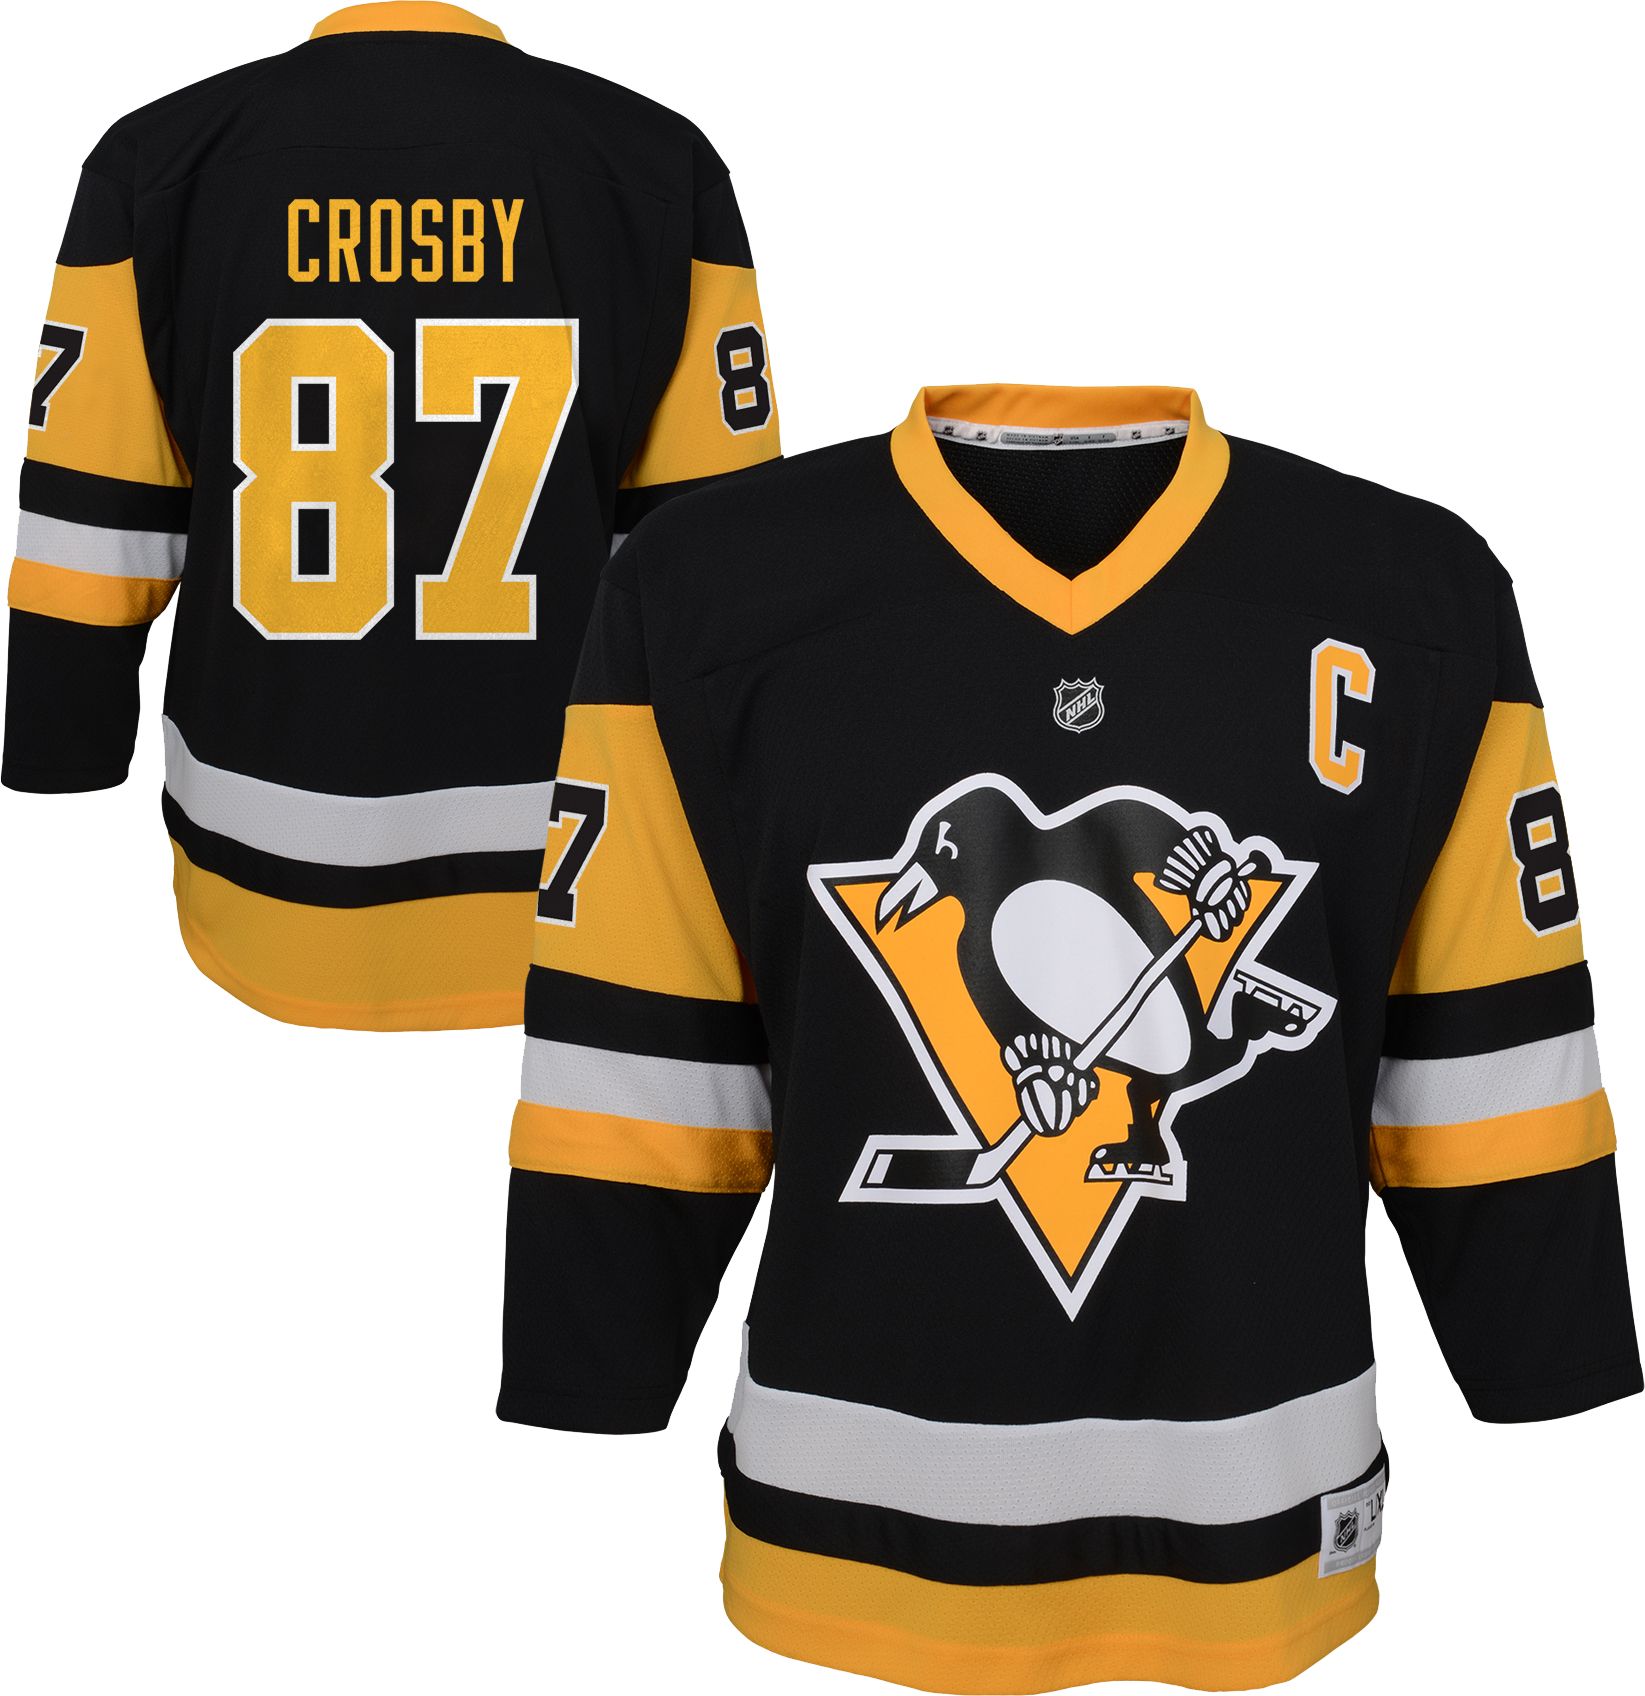 sidney crosby youth jersey